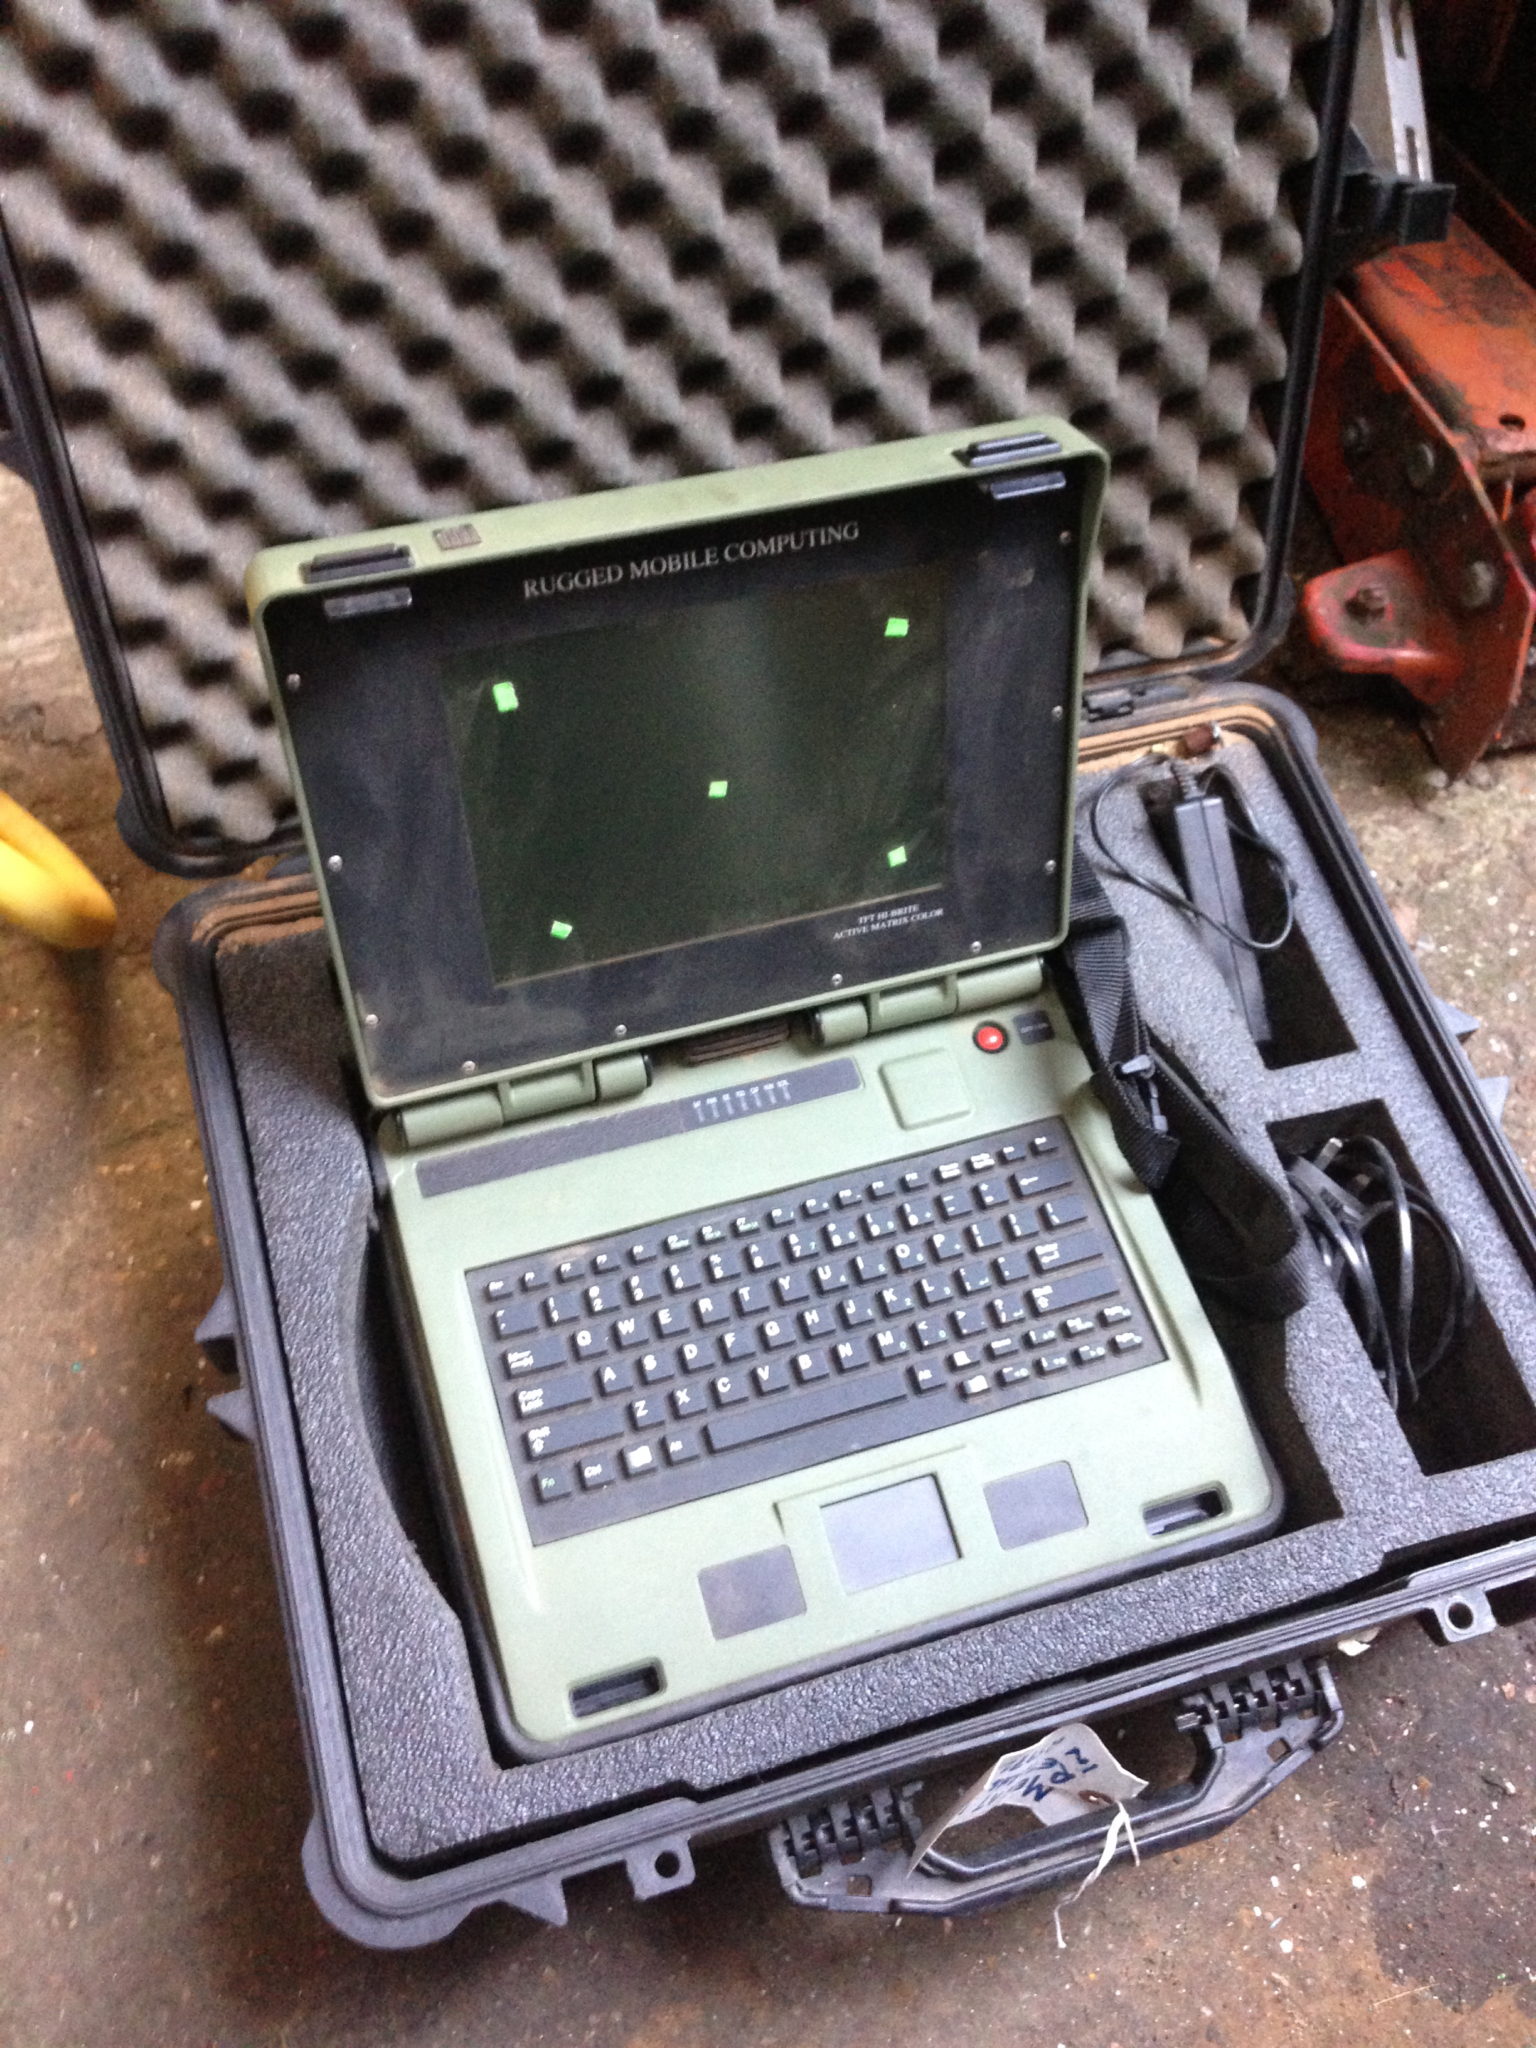 Rugged Military Computer - Computer